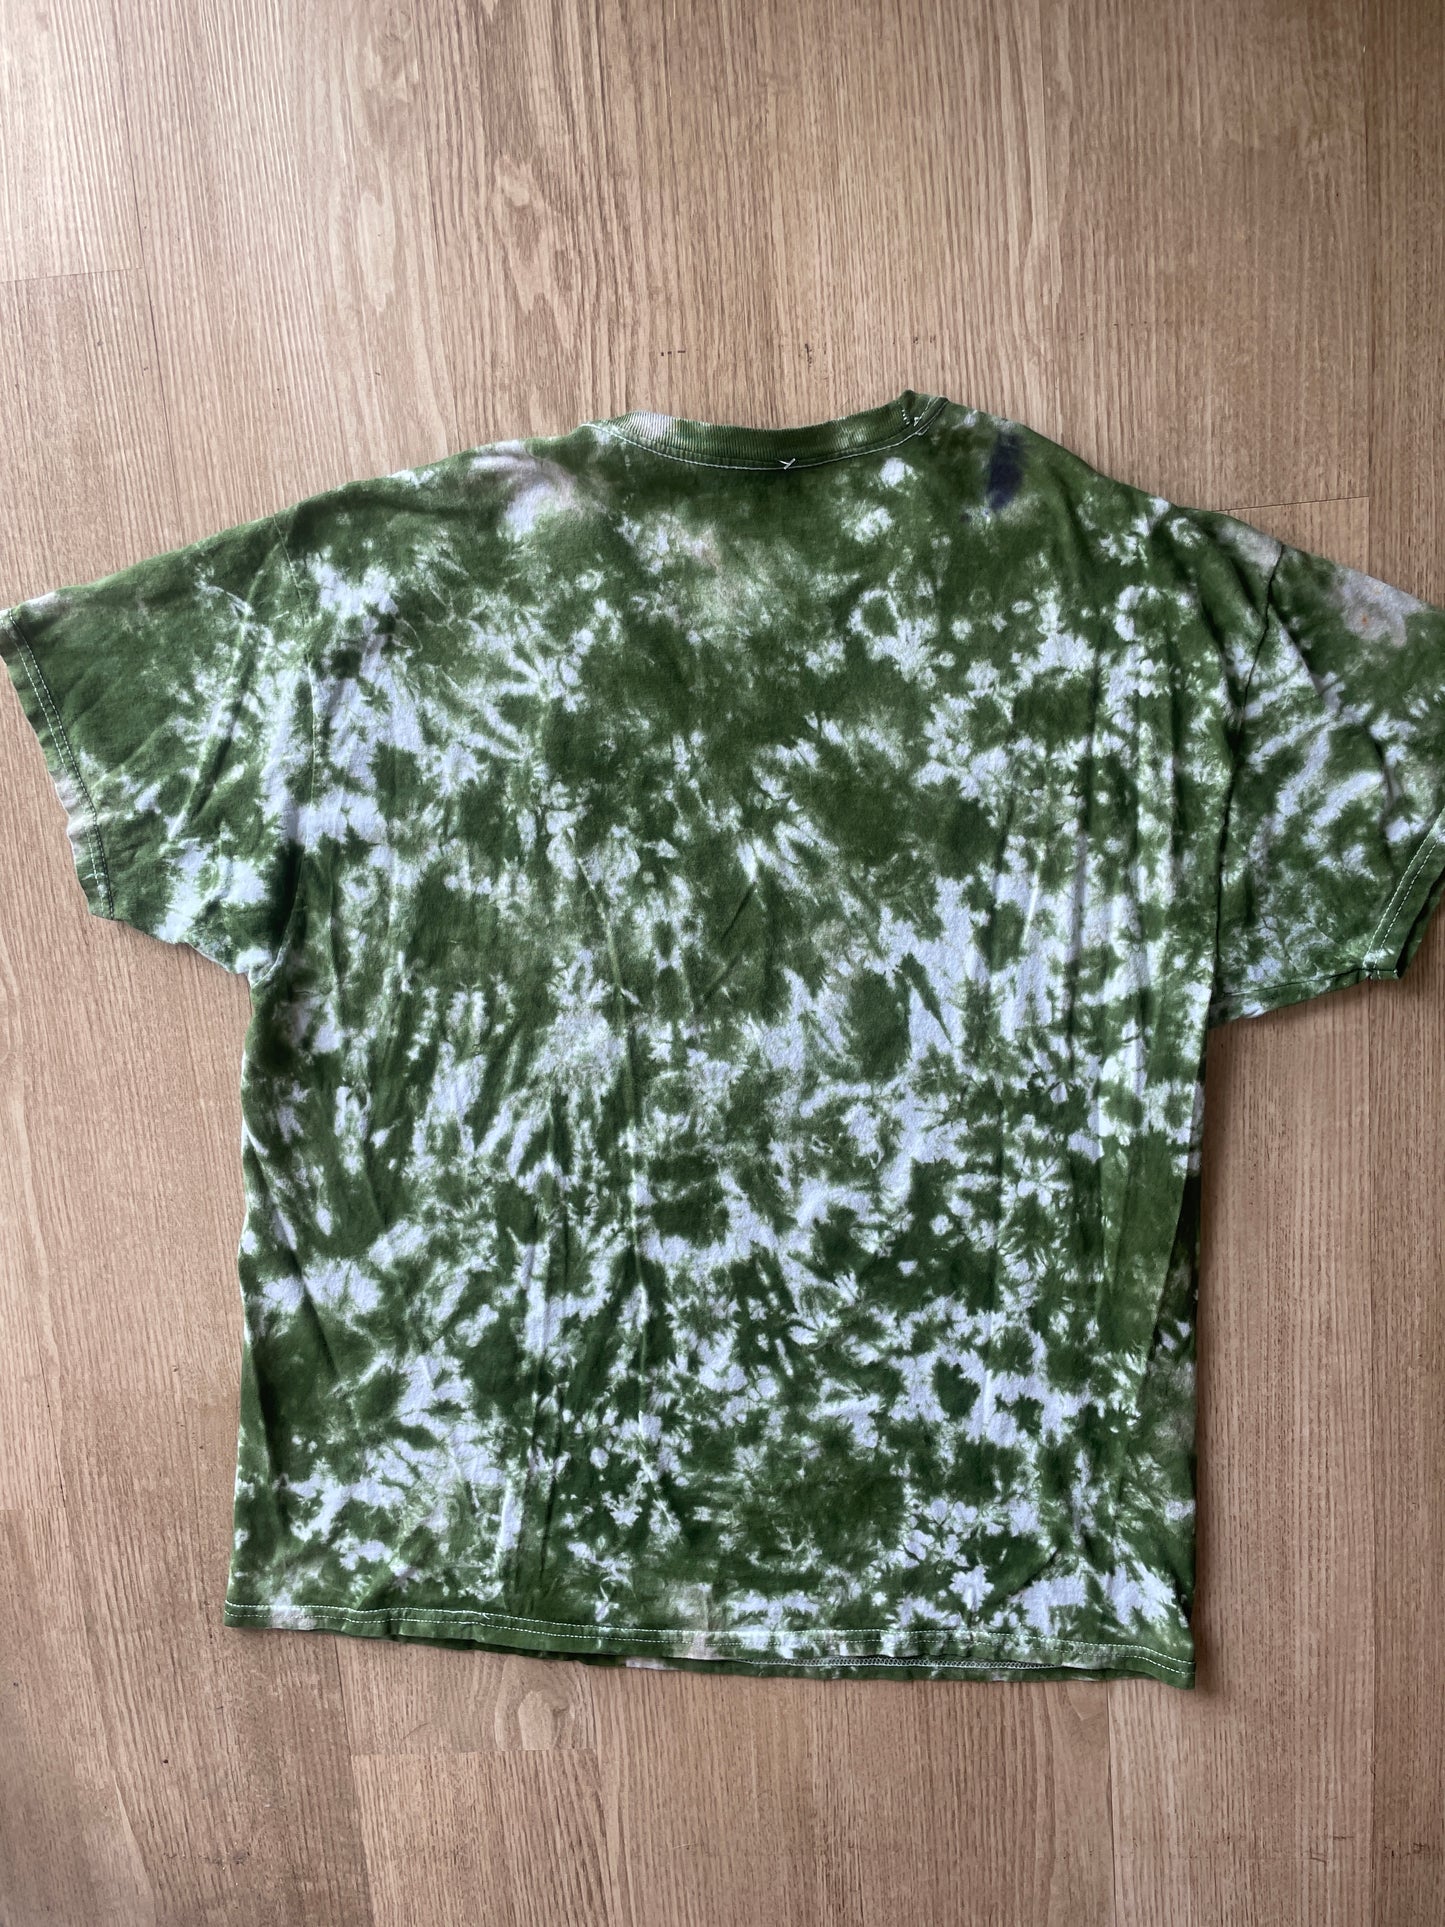 XL Men’s Saguaro Cactus Tie Dye T-Shirt | One-Of-a-Kind White and Green Crumpled Short Sleeve